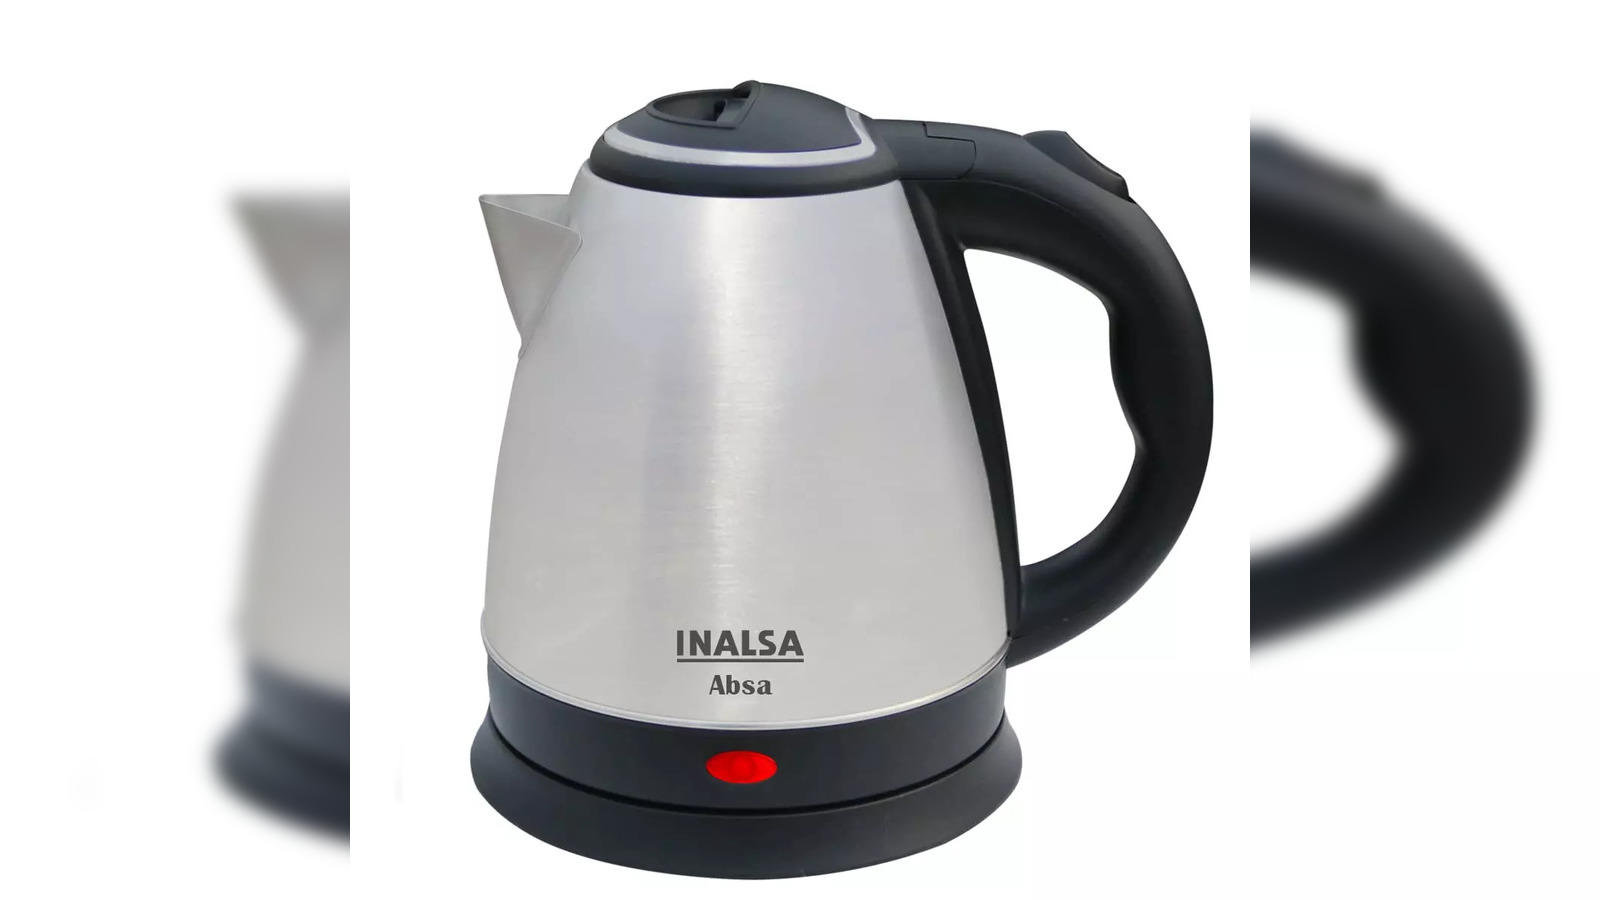 1pc Electric Glass Tea Kettle 1.8L Cordless Hot Water Boiler Electric  Kettle 1000W Wide-Opening & Stainless Steel Instant Heater With  Auto-Shutoff 